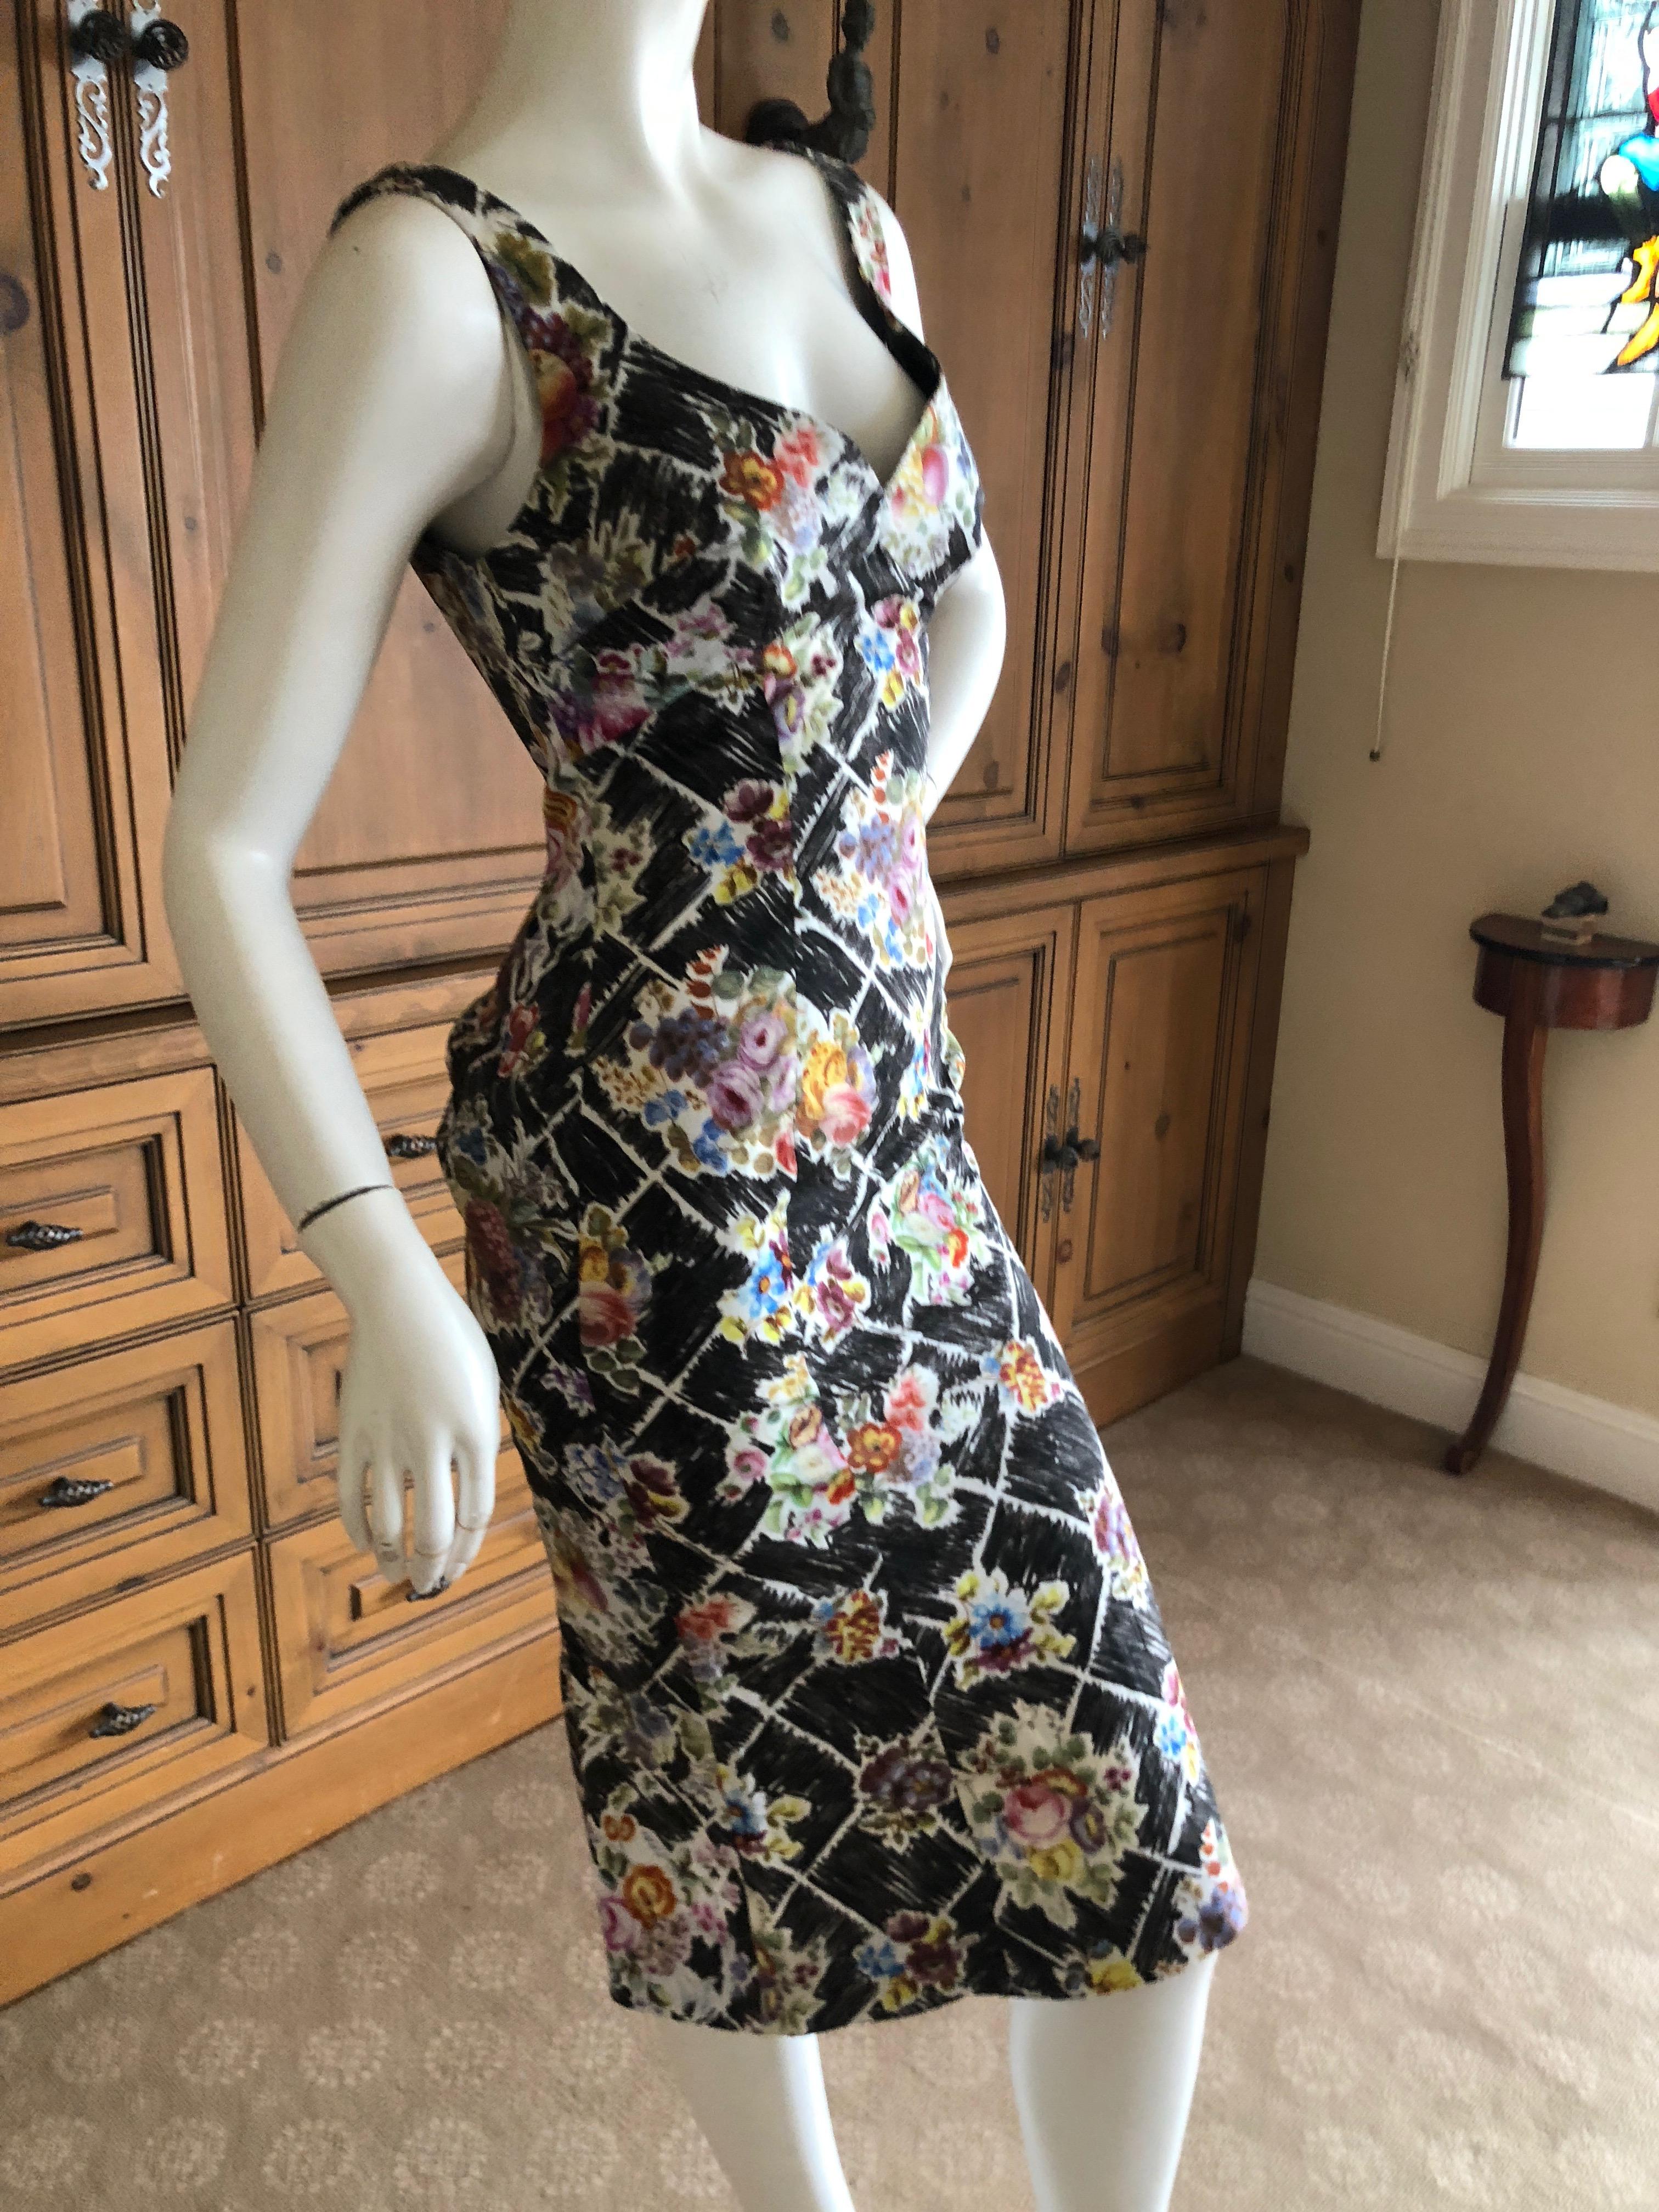 Vivienne Westwood Red Label Floral Print Cotton Day Dress   In Excellent Condition For Sale In Cloverdale, CA